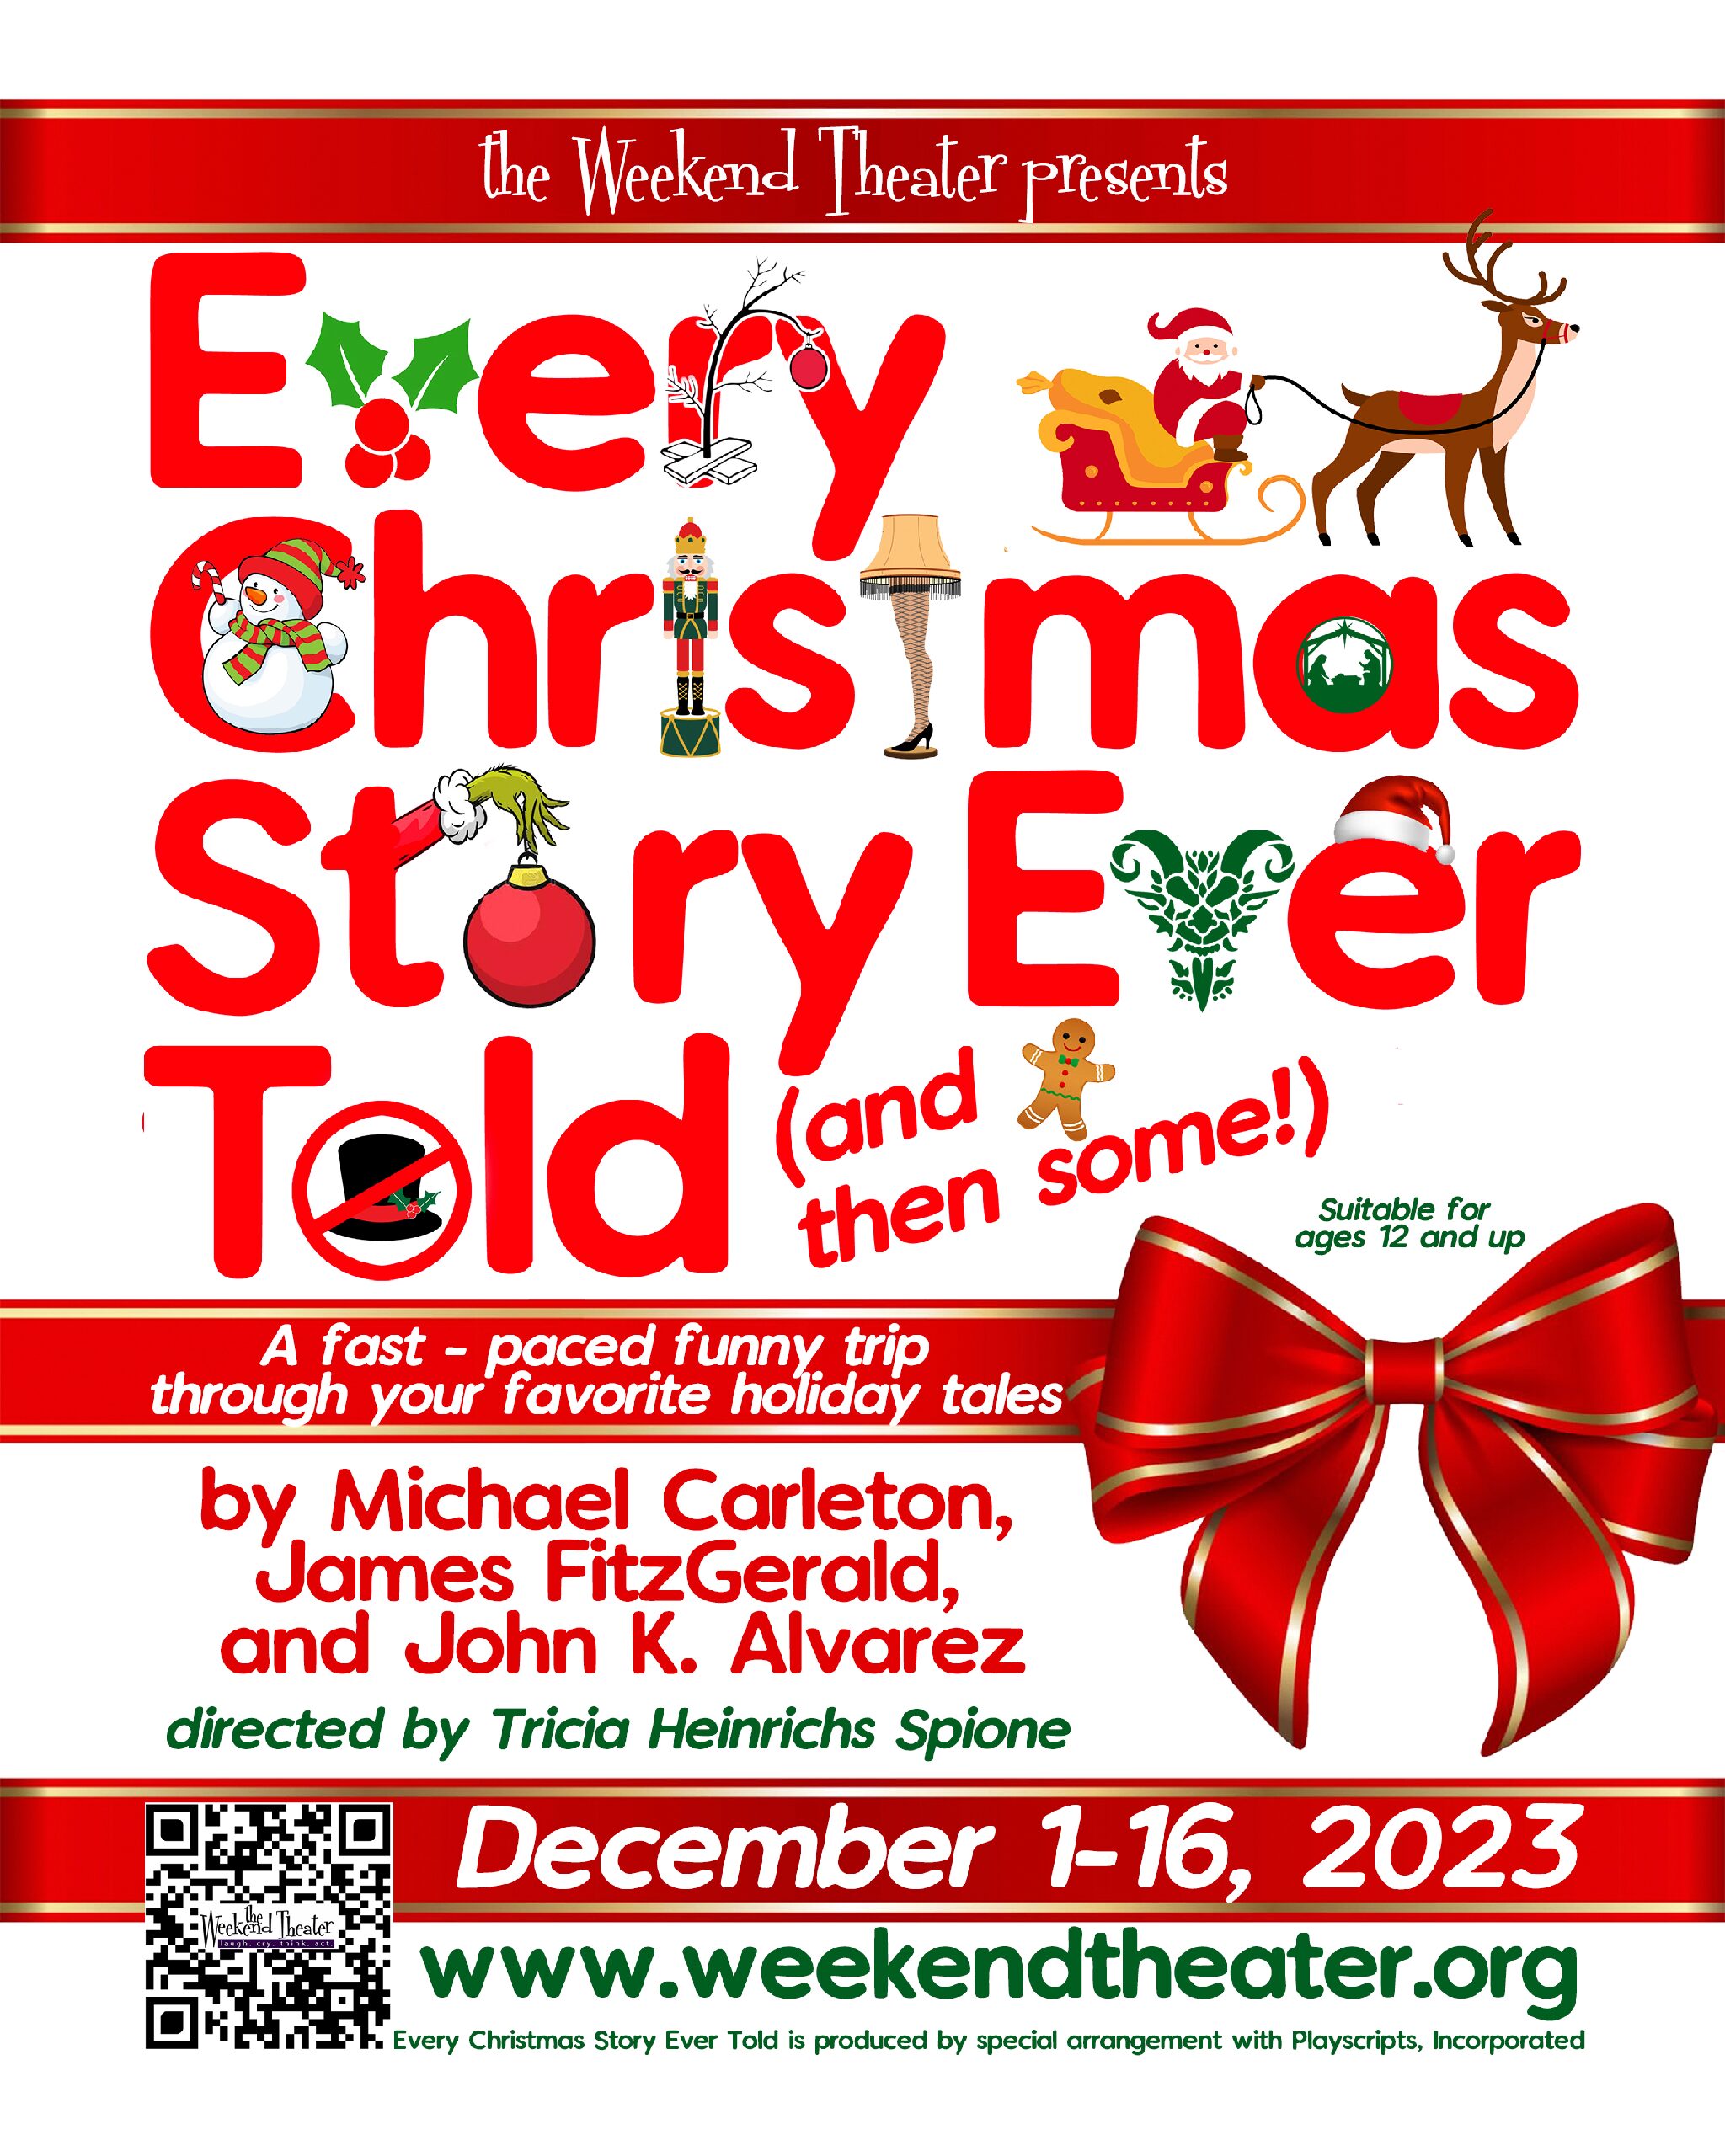 Announcing the cast of “Every Christmas Story Ever Told (And Then Some!)” at The Weekend Theater!